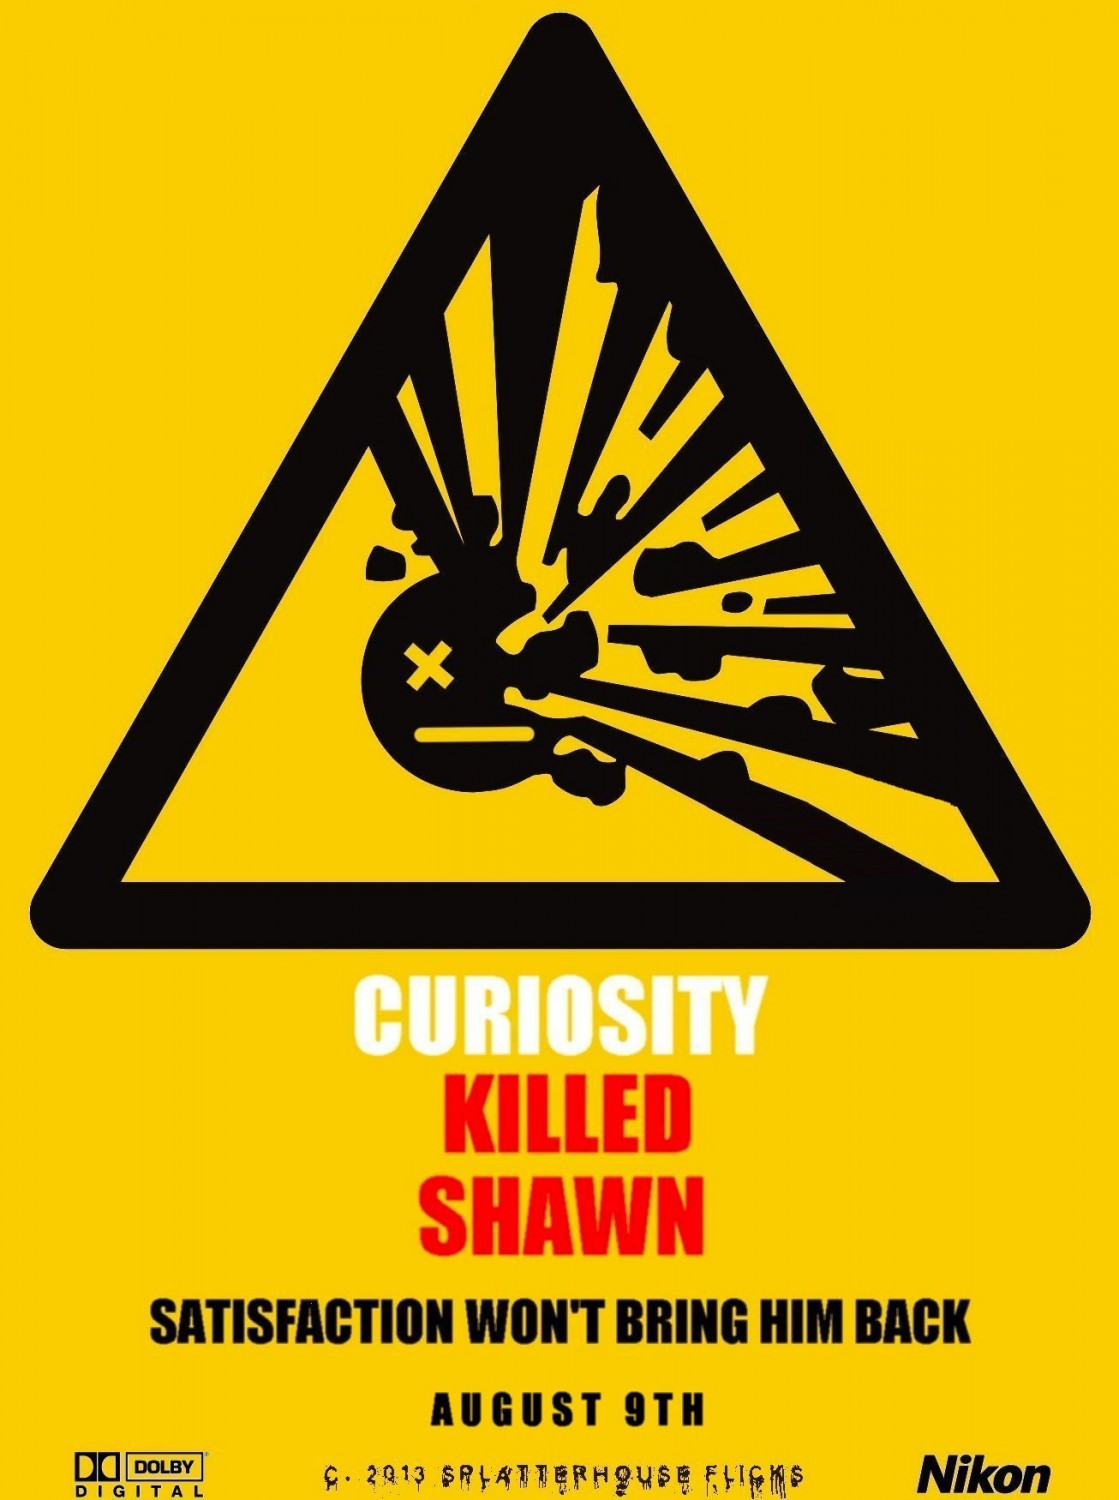 Extra Large Movie Poster Image for Curiosity Killed Shawn